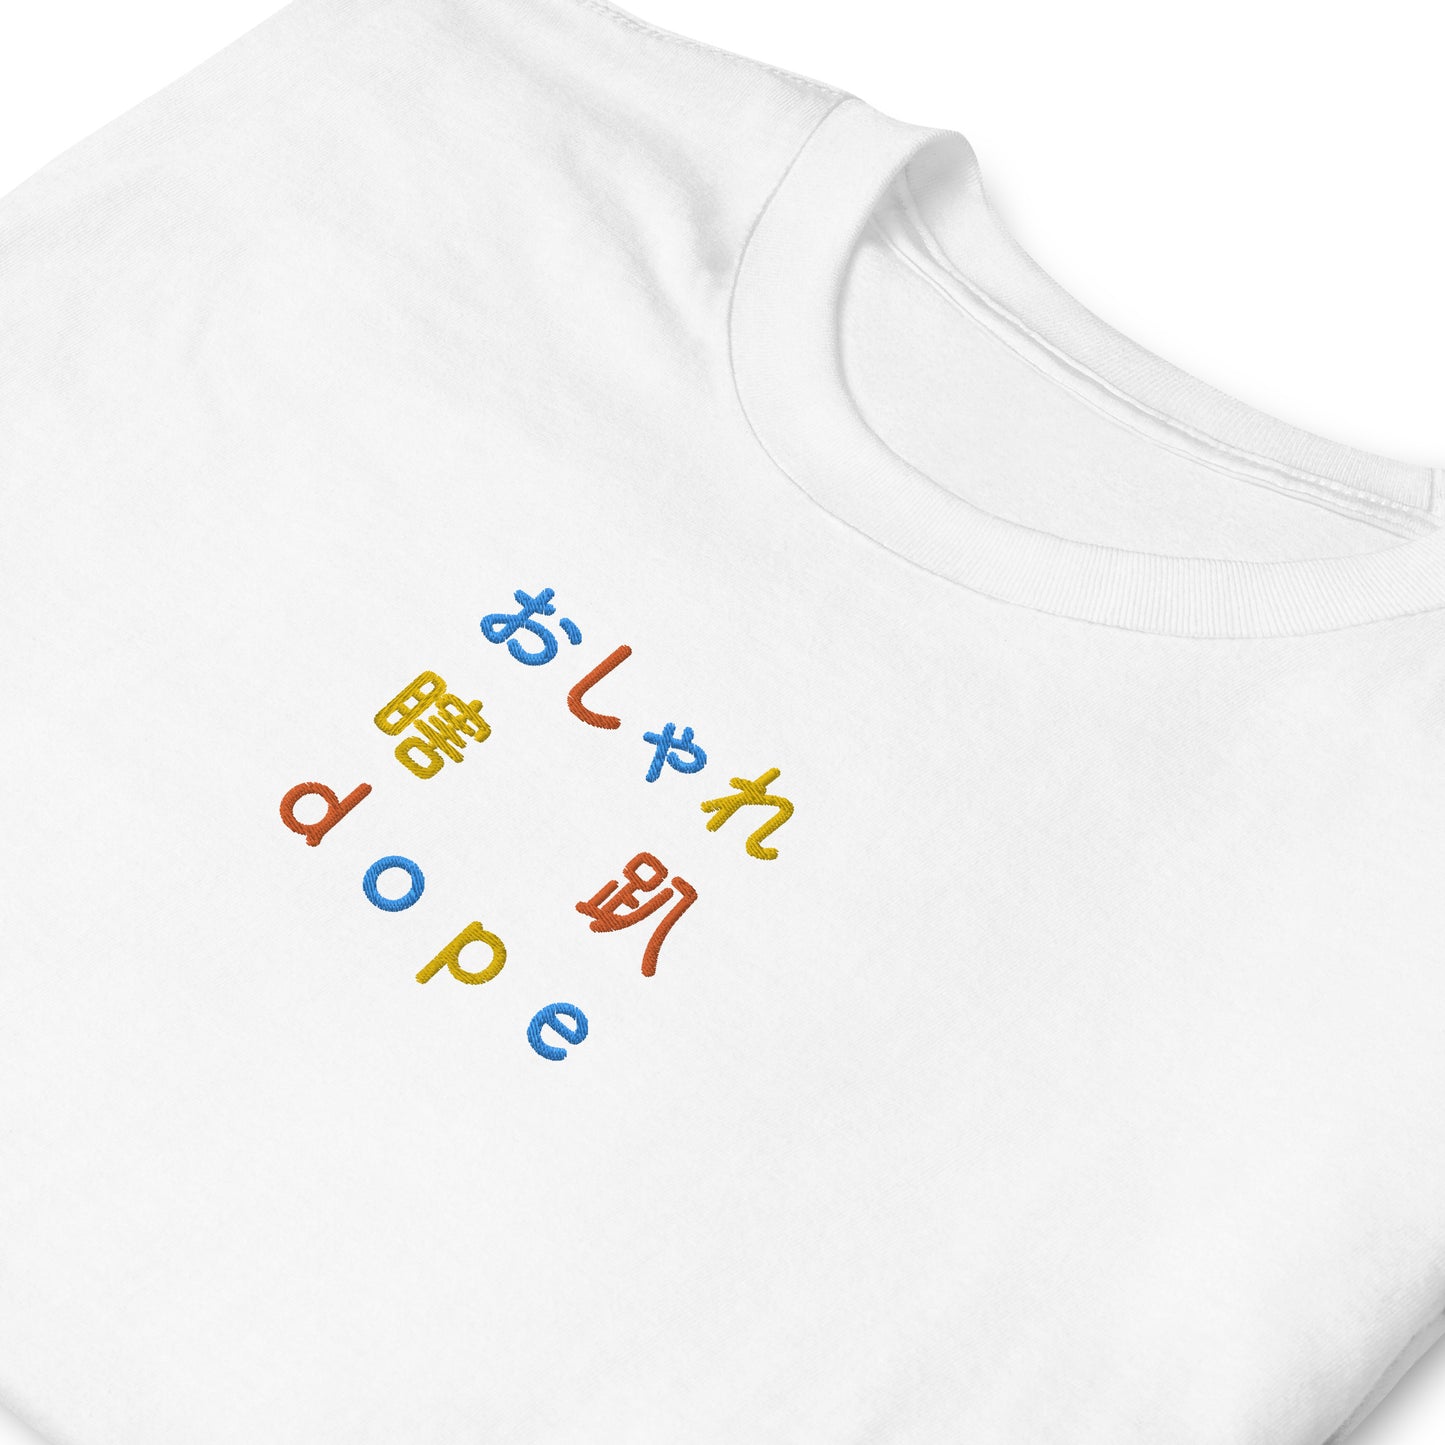 White High Quality Tee - Front Design with an Blue, Orange, Yellow Embroidery "Dope" in Japanese,Chinese and English